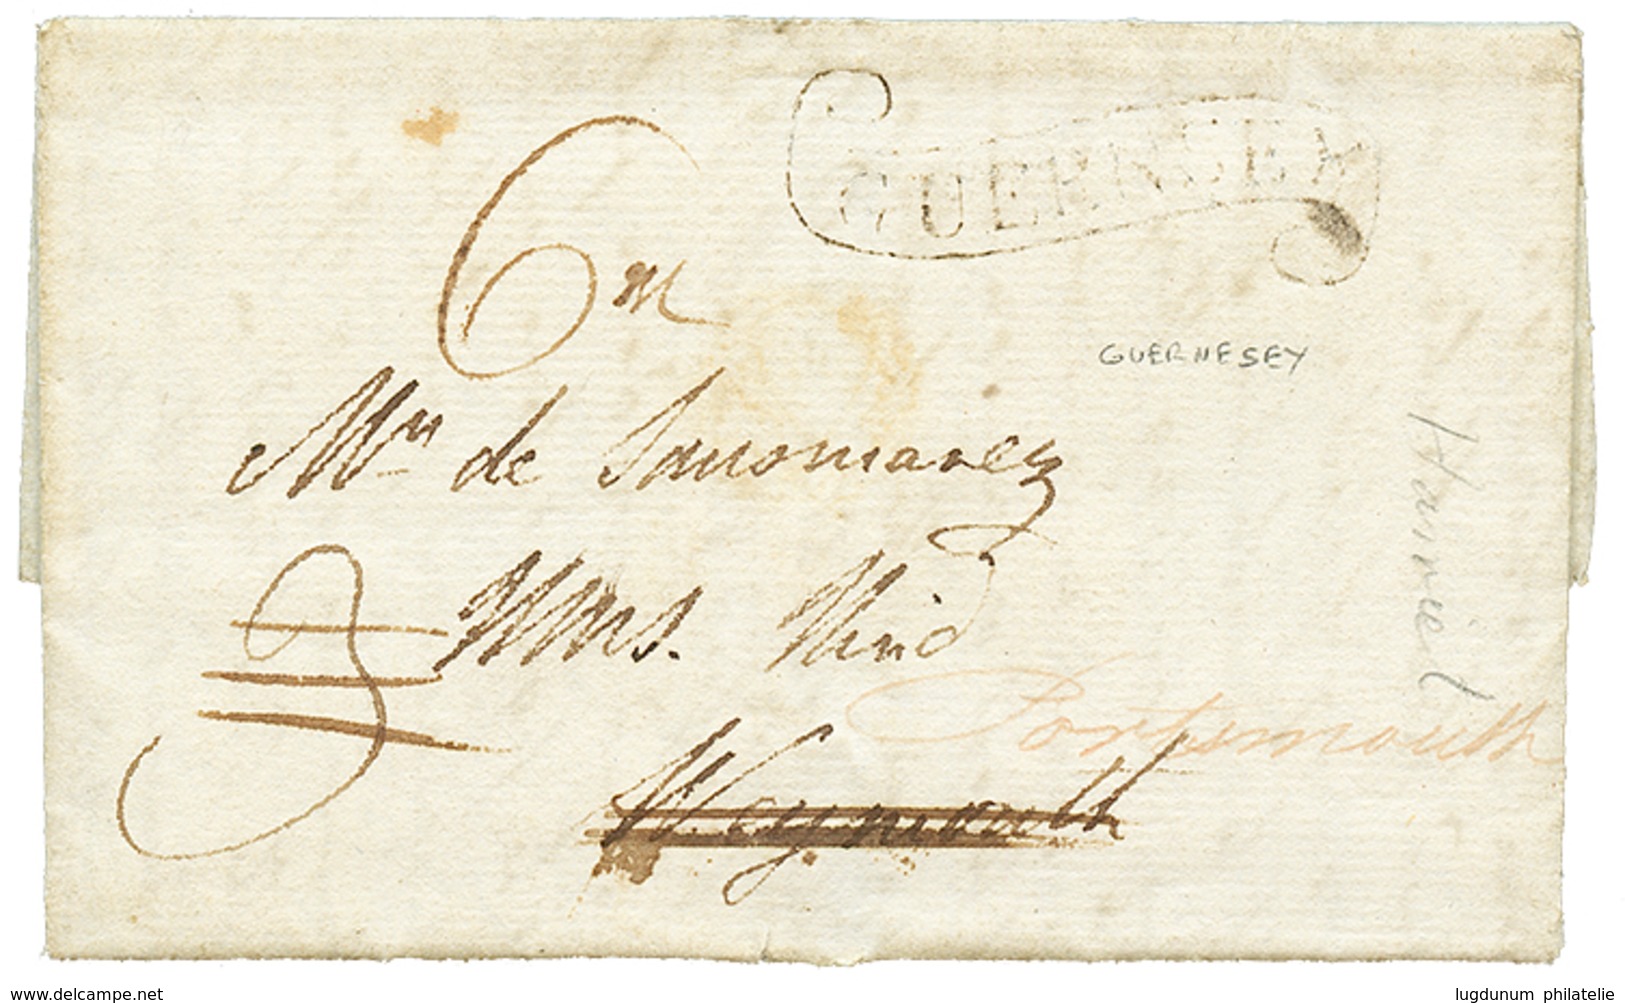 554 1820 Scroll GUERNESEY On Entire Letter From GUERNESEY To "H.M.S HIND" WEYMOUTH. Vf. - Guernesey